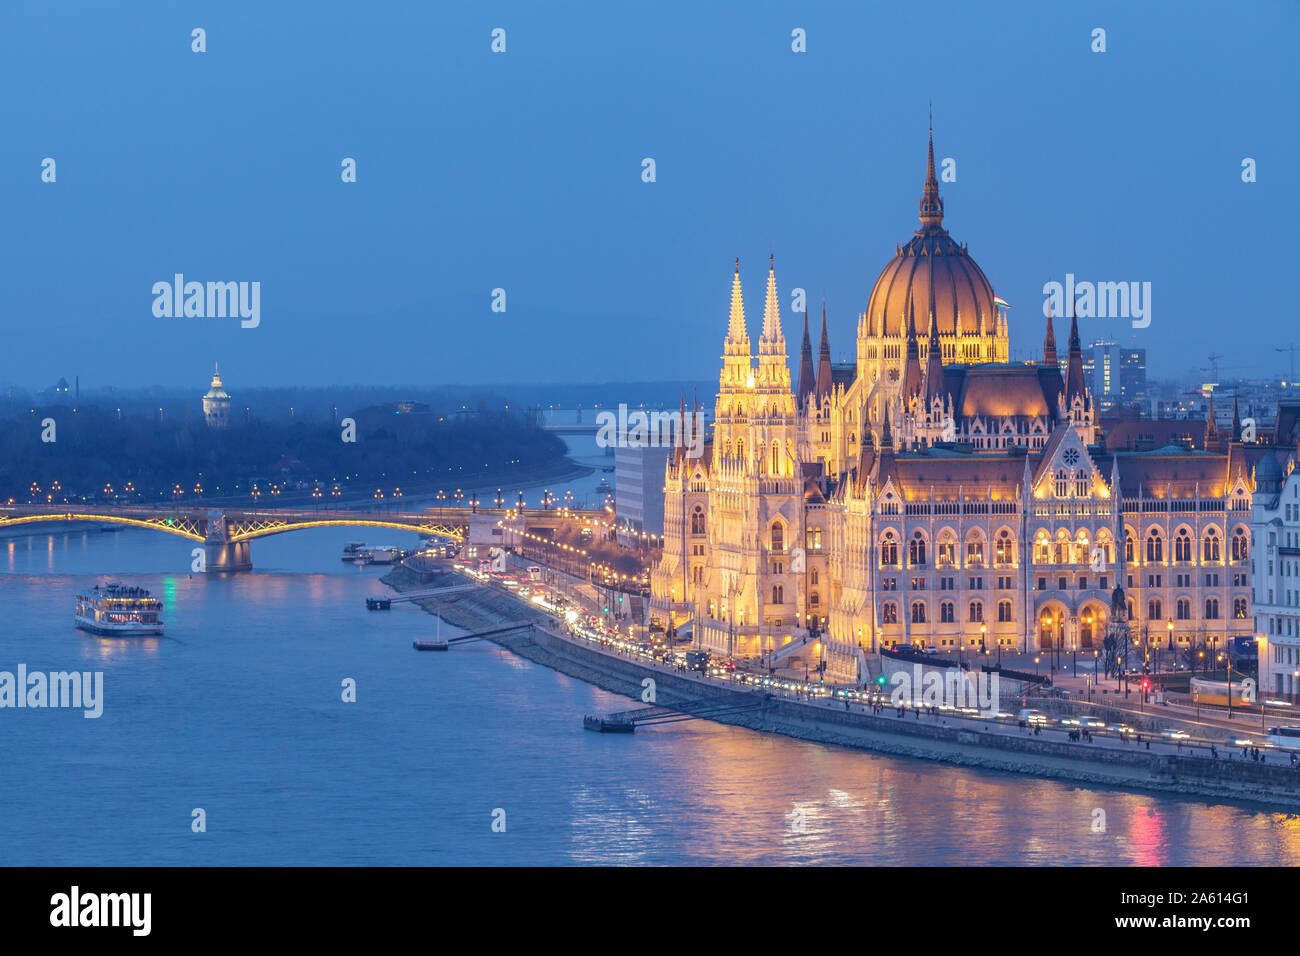 Sitting on the banks of the River Danube, the Hungarian Parliament Building dates from the late 19th century, UNESCO, Budapest, Hungary, Europe Stock Photo